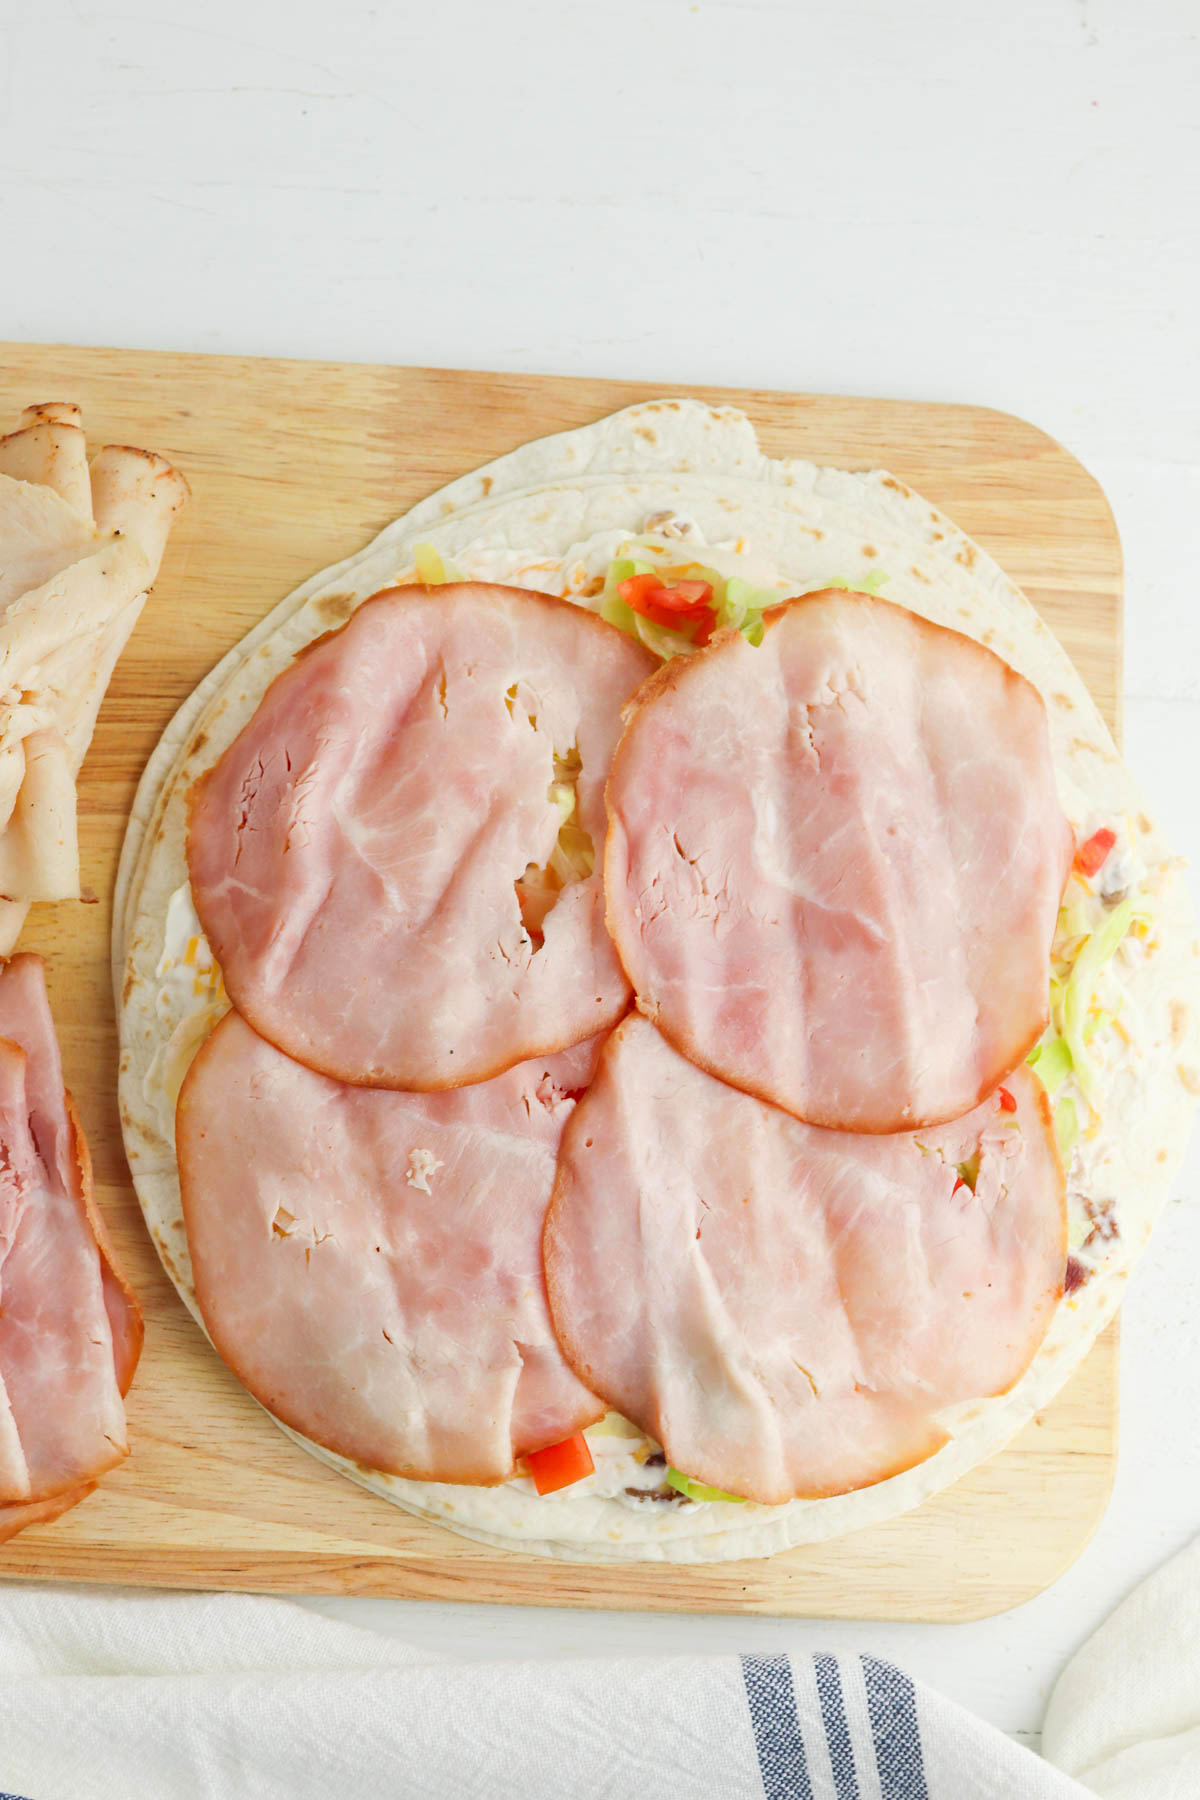 Open-faced tortilla with ham slices on a wooden cutting board.